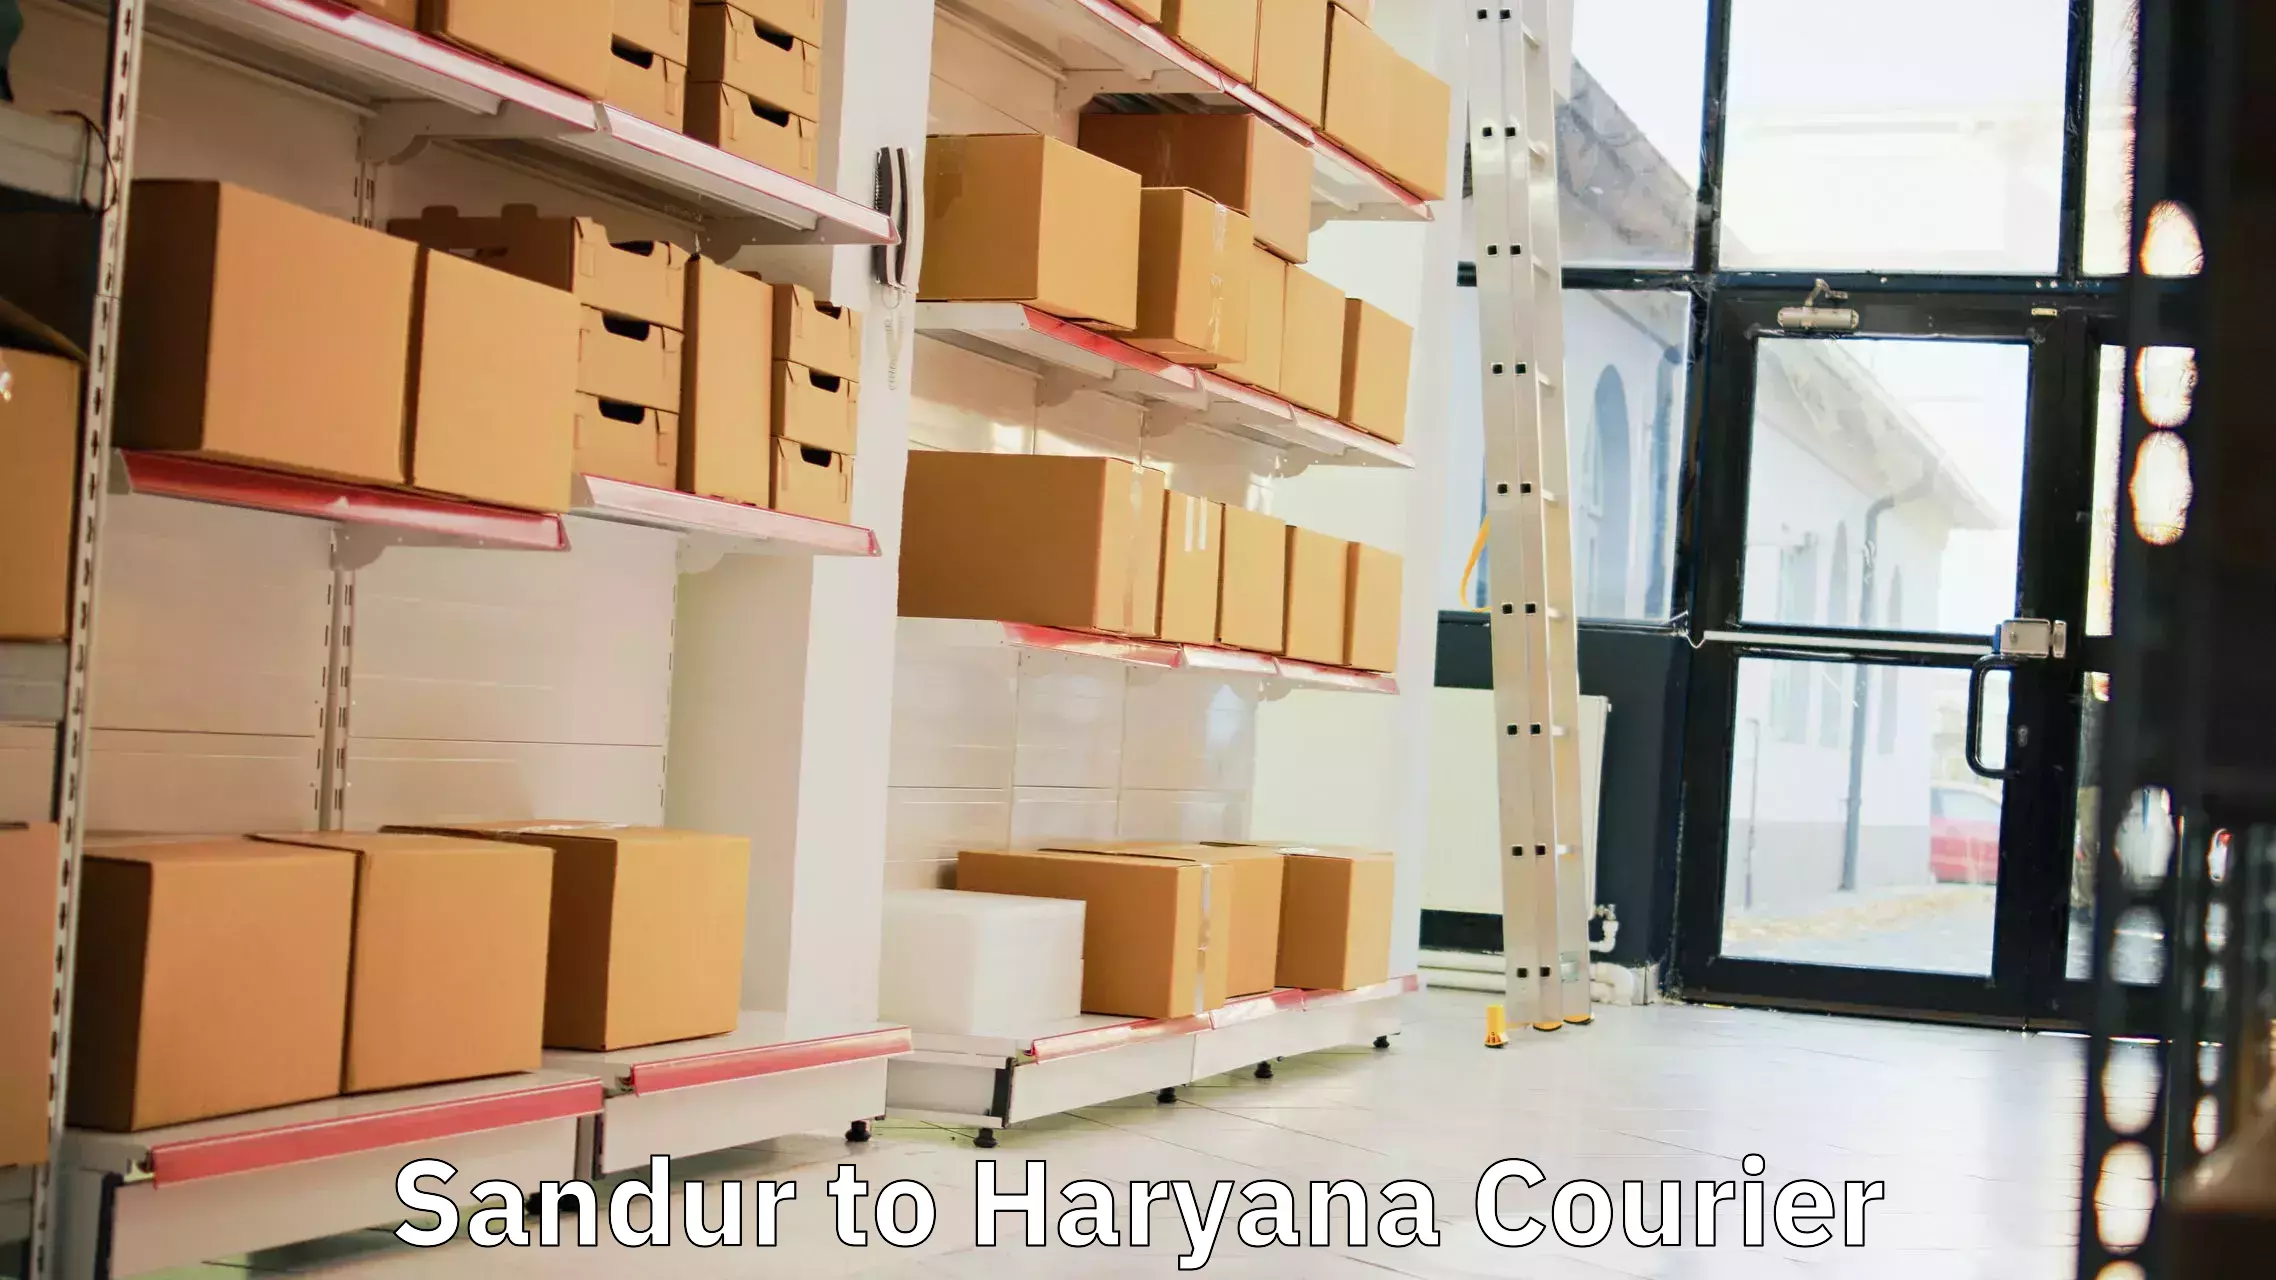 Same-day delivery options in Sandur to Haryana